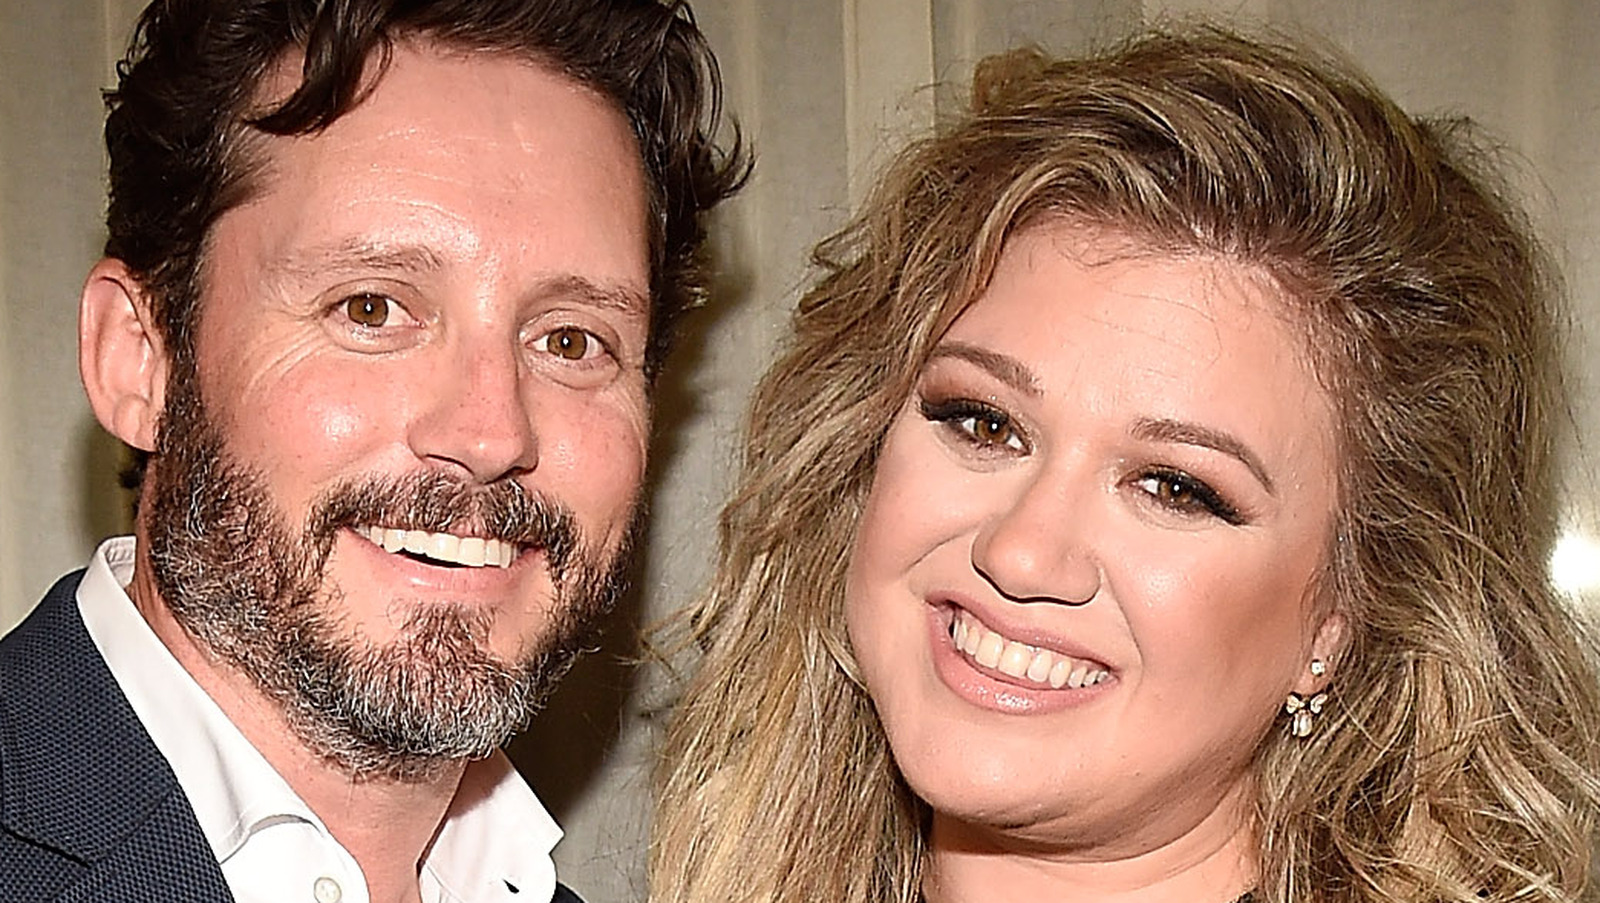 Kelly Clarkson’s Drama With Her Ex Doesn’t Seem To Be Over Yet